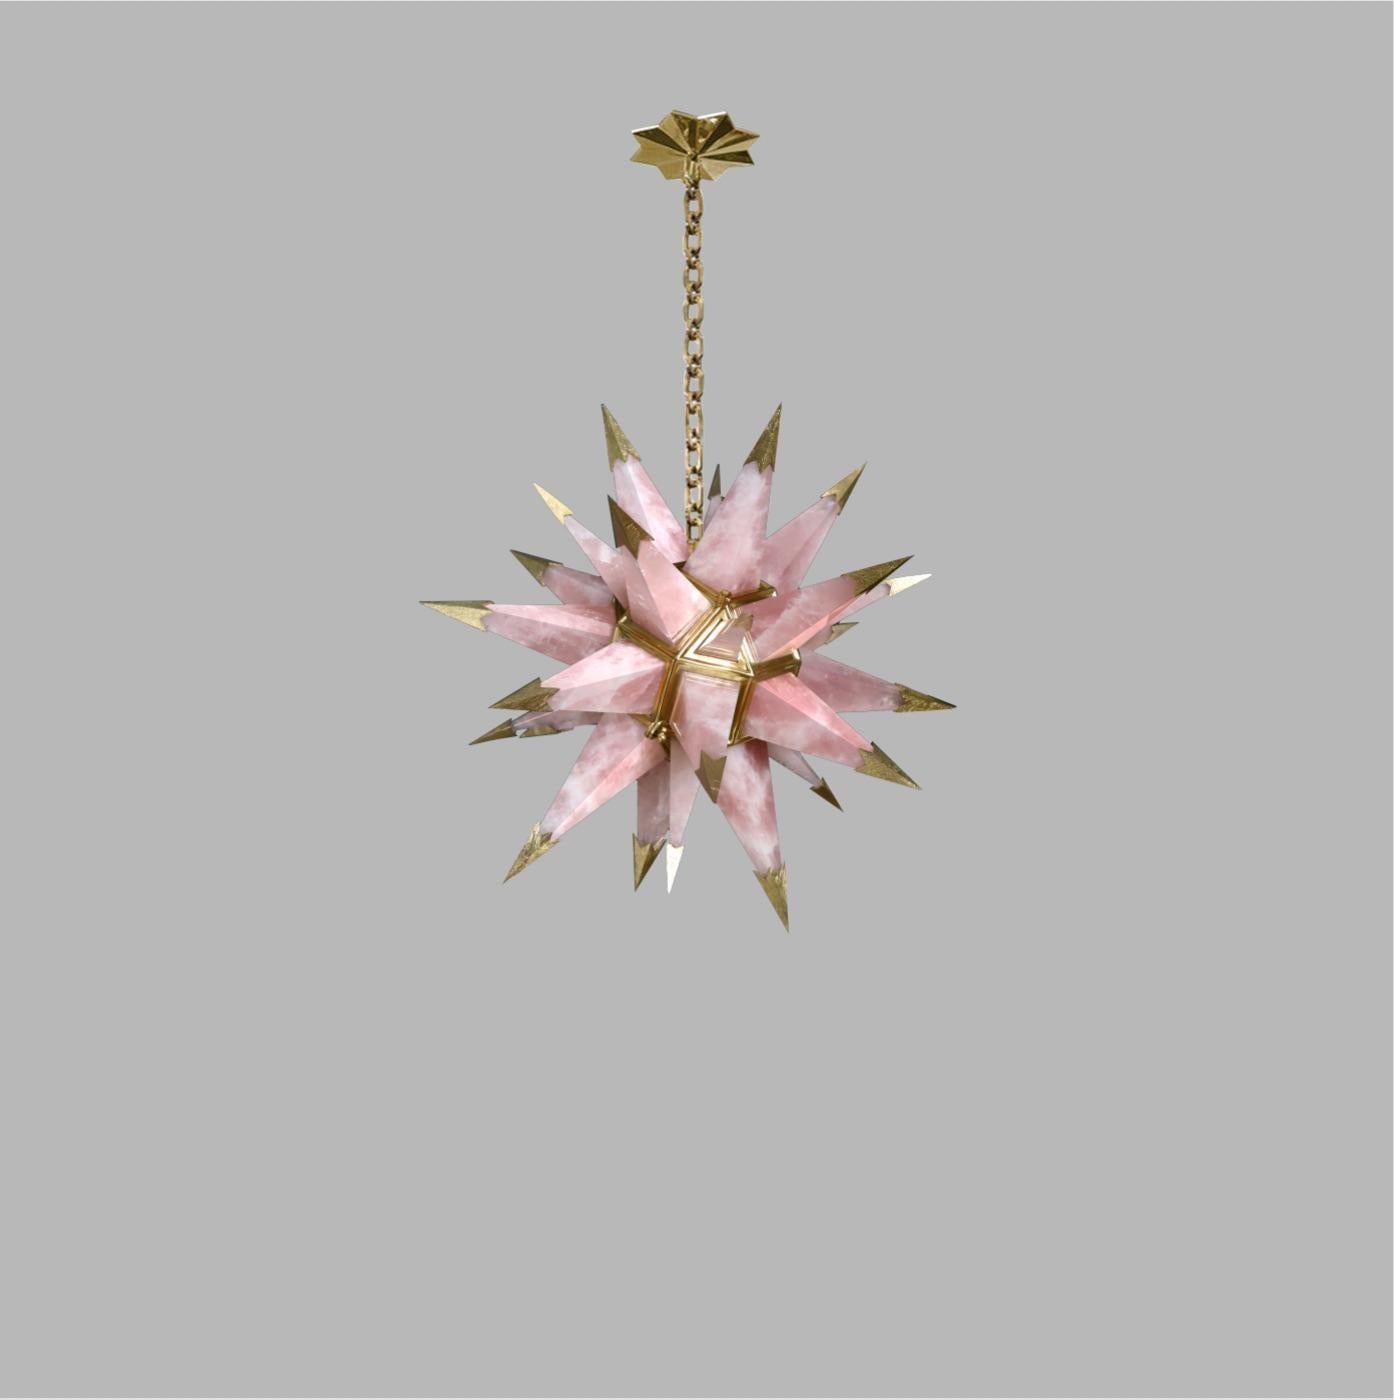 Pink rock crystal star chandelier with polish brass tips. Created by Phoenix Gallery, NYC.
Two candlelabra socket installed. Use two 75 watts LED candelabra lightbulbs.
The chandelier is 21.5”/W x 21.5”/D x 21.5”/H without the chain.

Light bulb